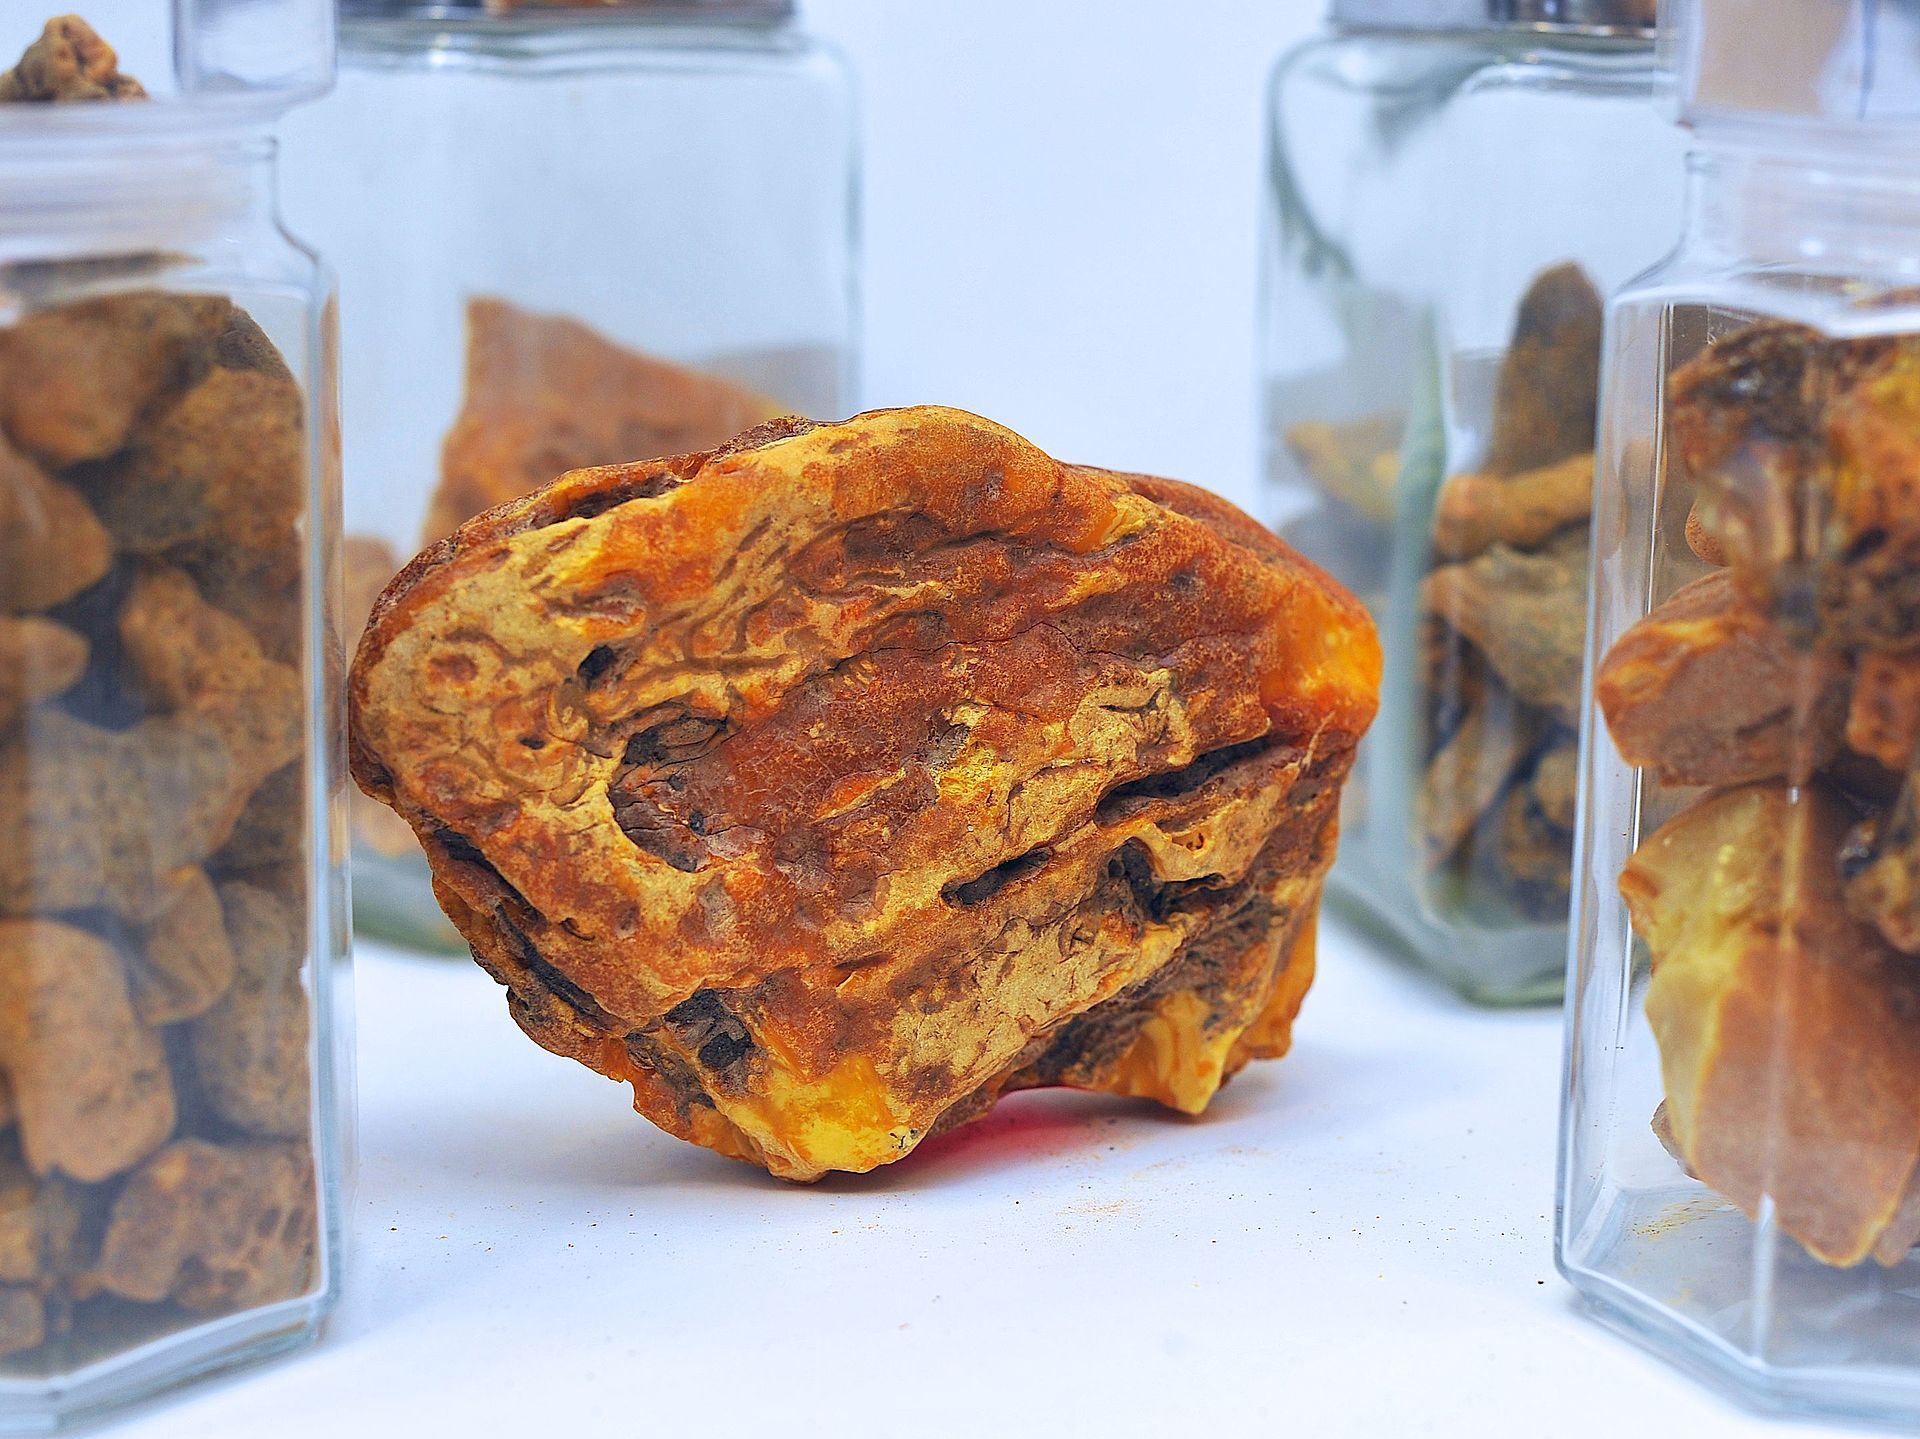 Amber Plant has Built a Unique Collection of Amber